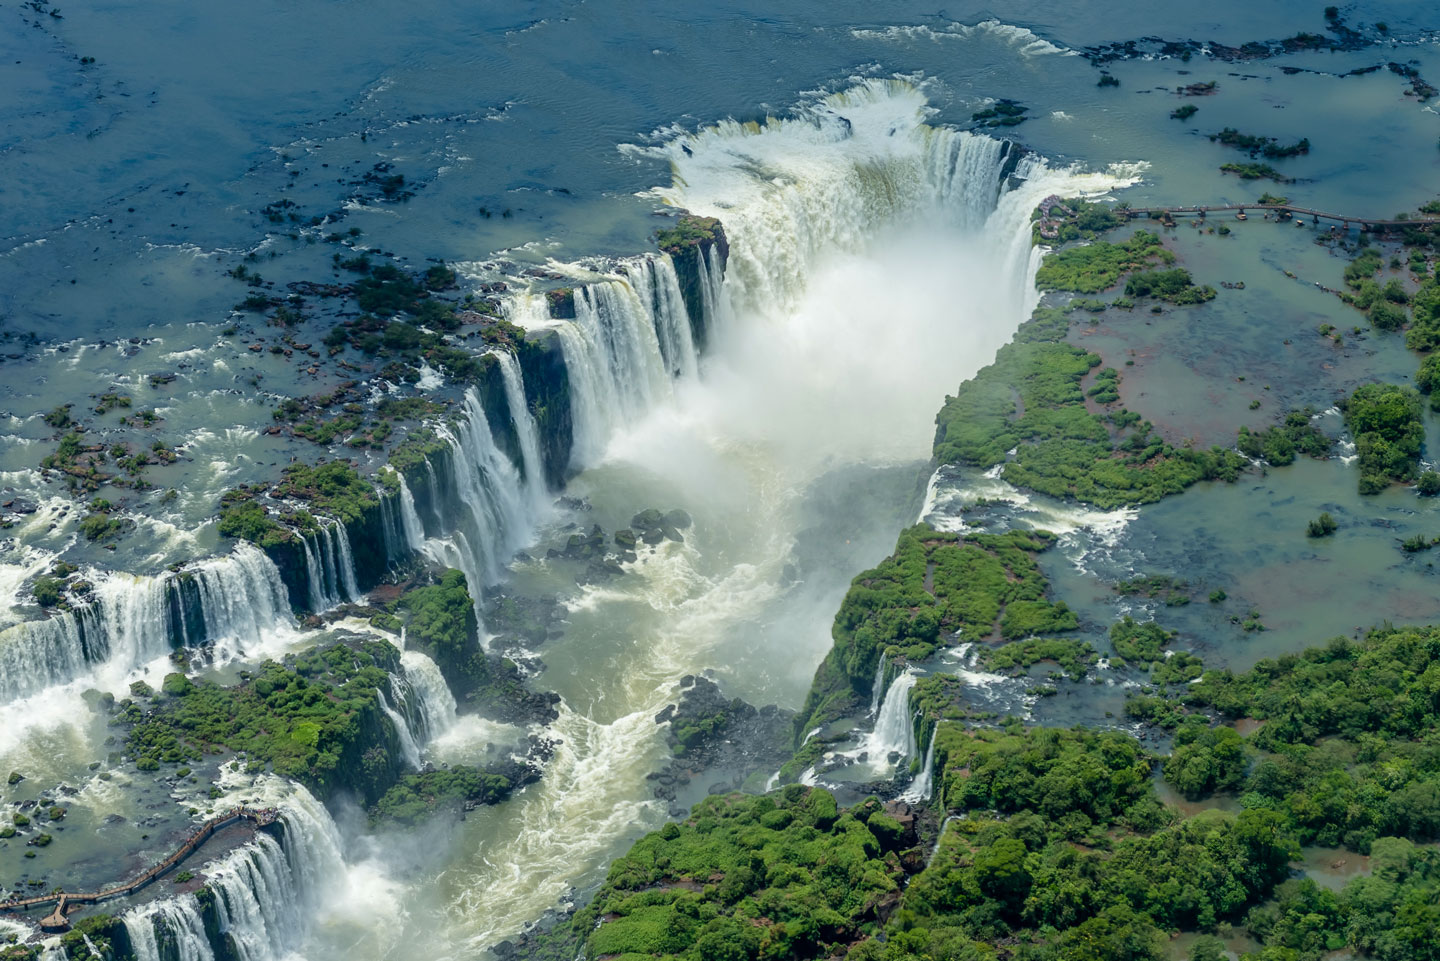 Iguazu Falls is located on the border between the Argentine province of Misiones and the Brazilian state of Paraná.